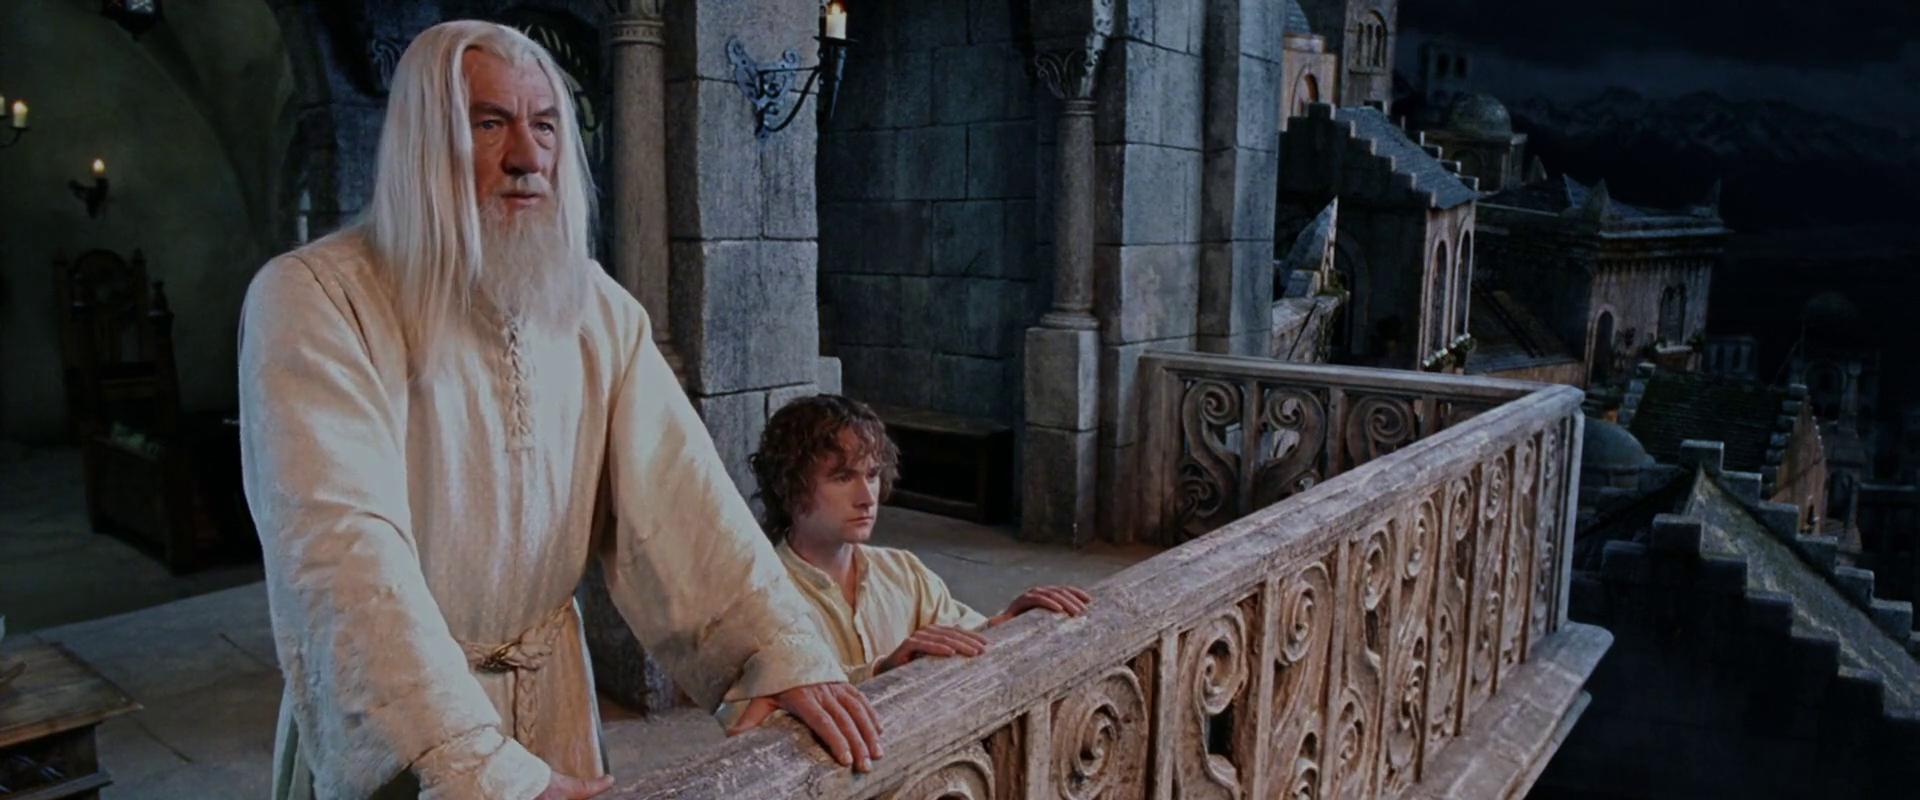 Ian McKellen and Billy Boyd in The Lord of the Rings: The Return of the King (2003)